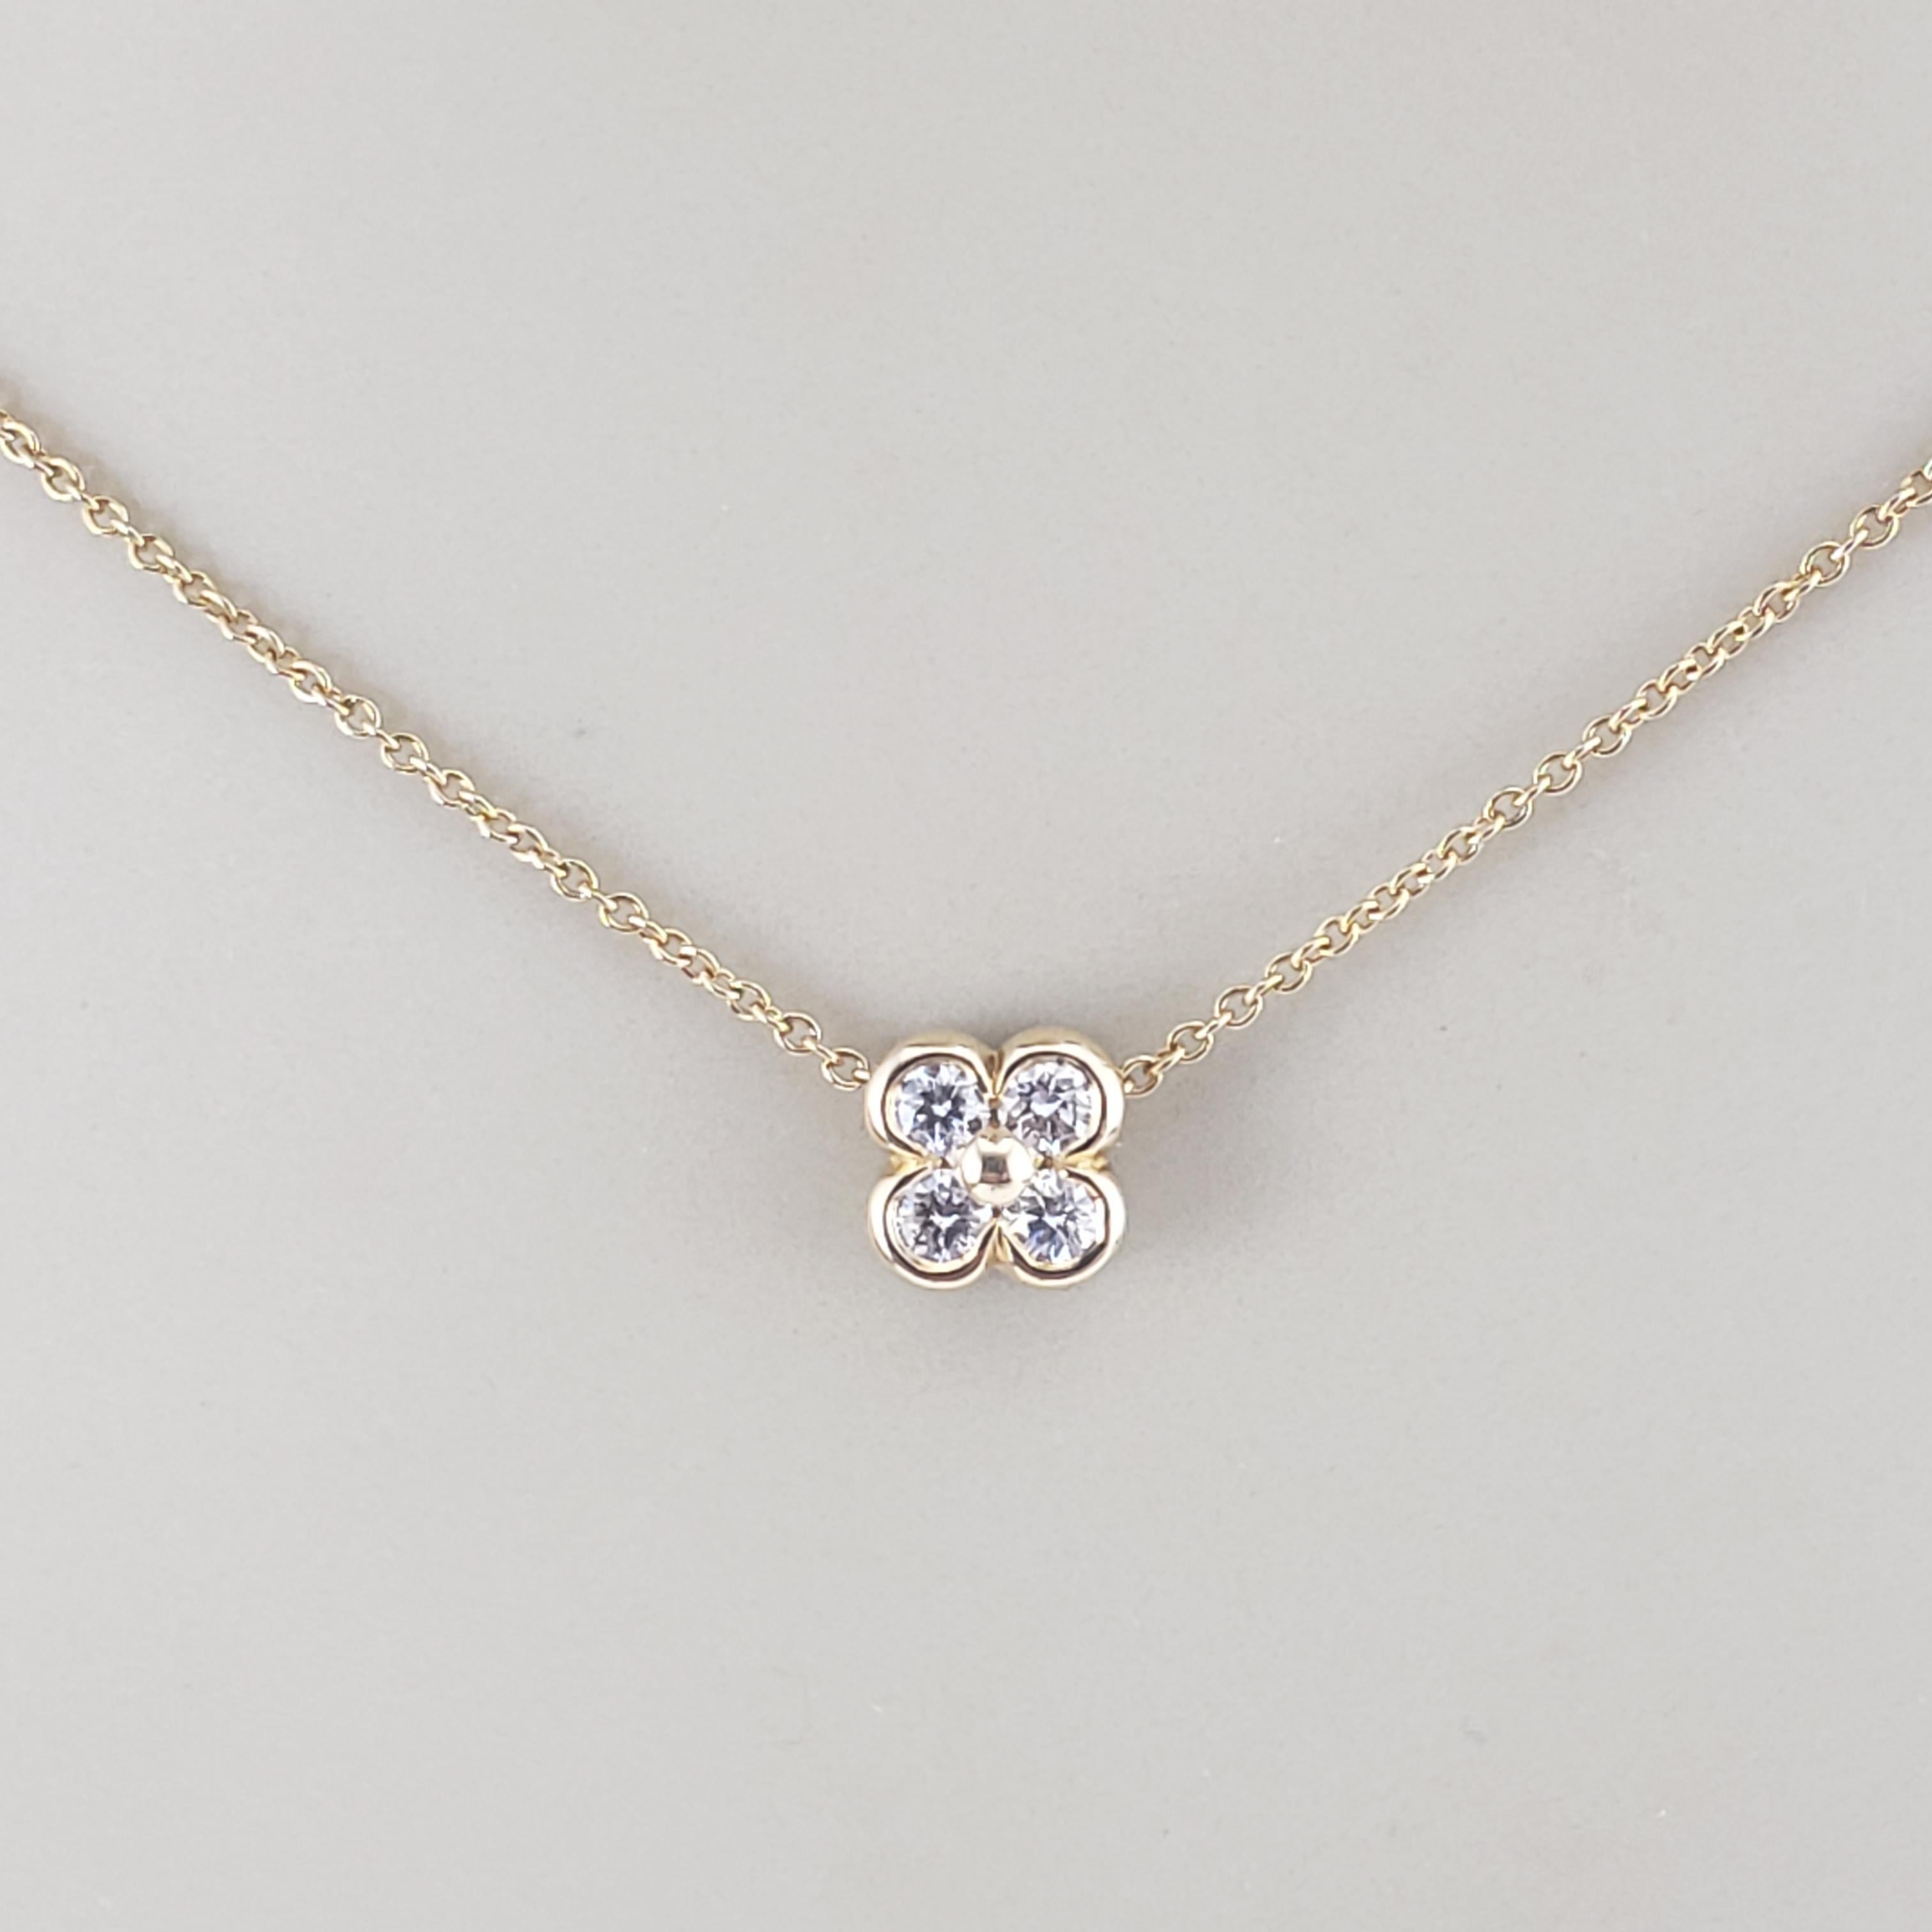 Tiffany & Co. 18 Karat Yellow Gold Diamond Flower Clover Necklace #16837 For Sale 3